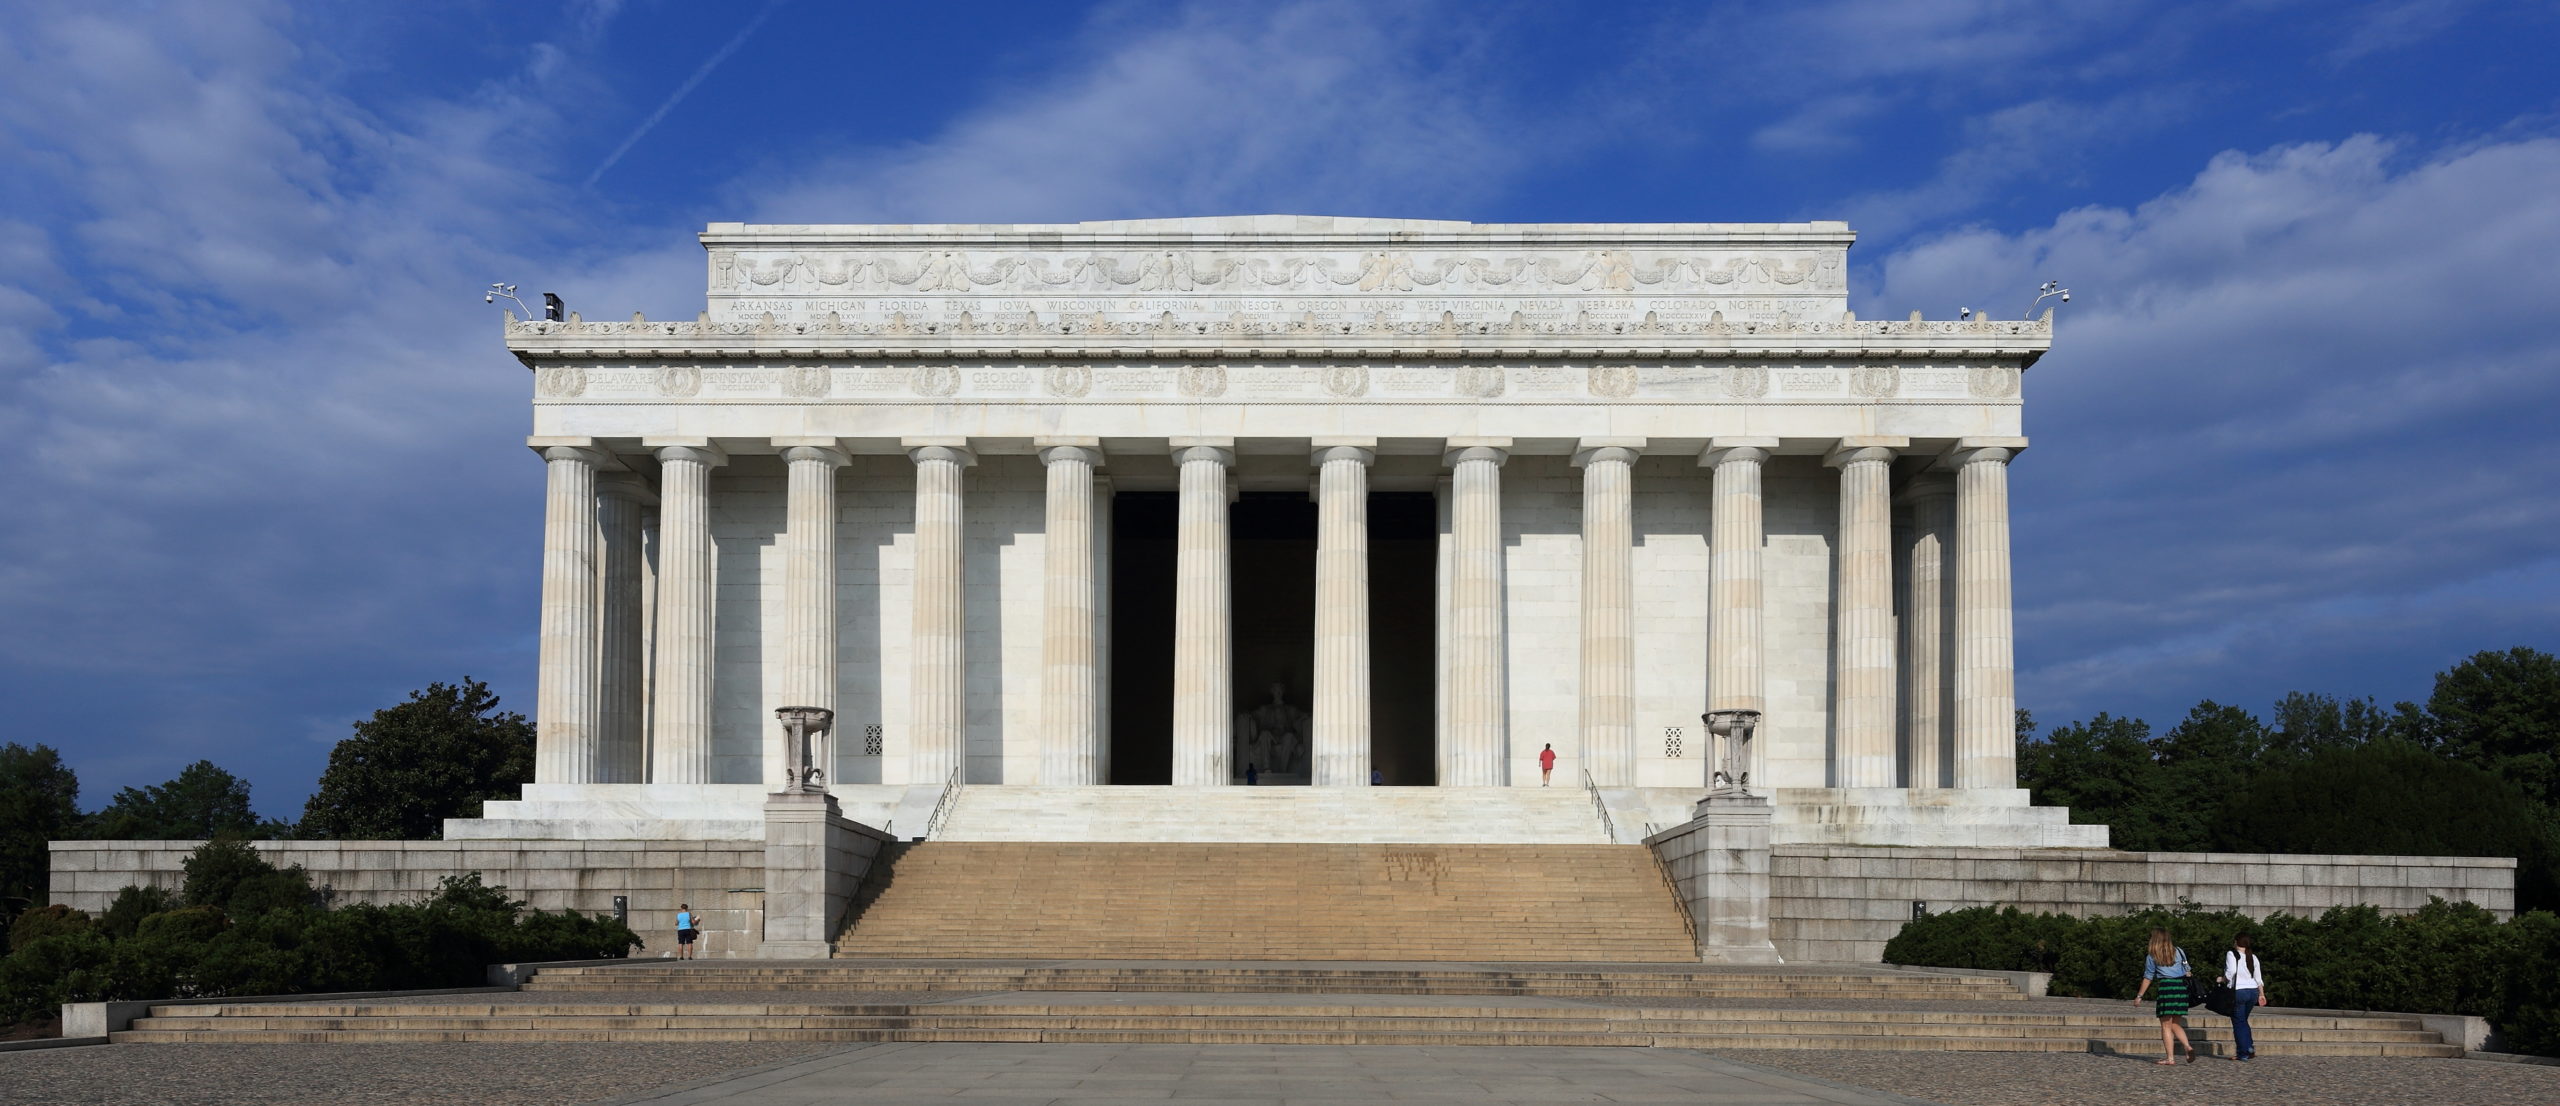 A wide image of the Lincoln Memorial (a horizontal building with Roman columns and descending stairs in the front), on a sunny day with a few bystanders walking around.